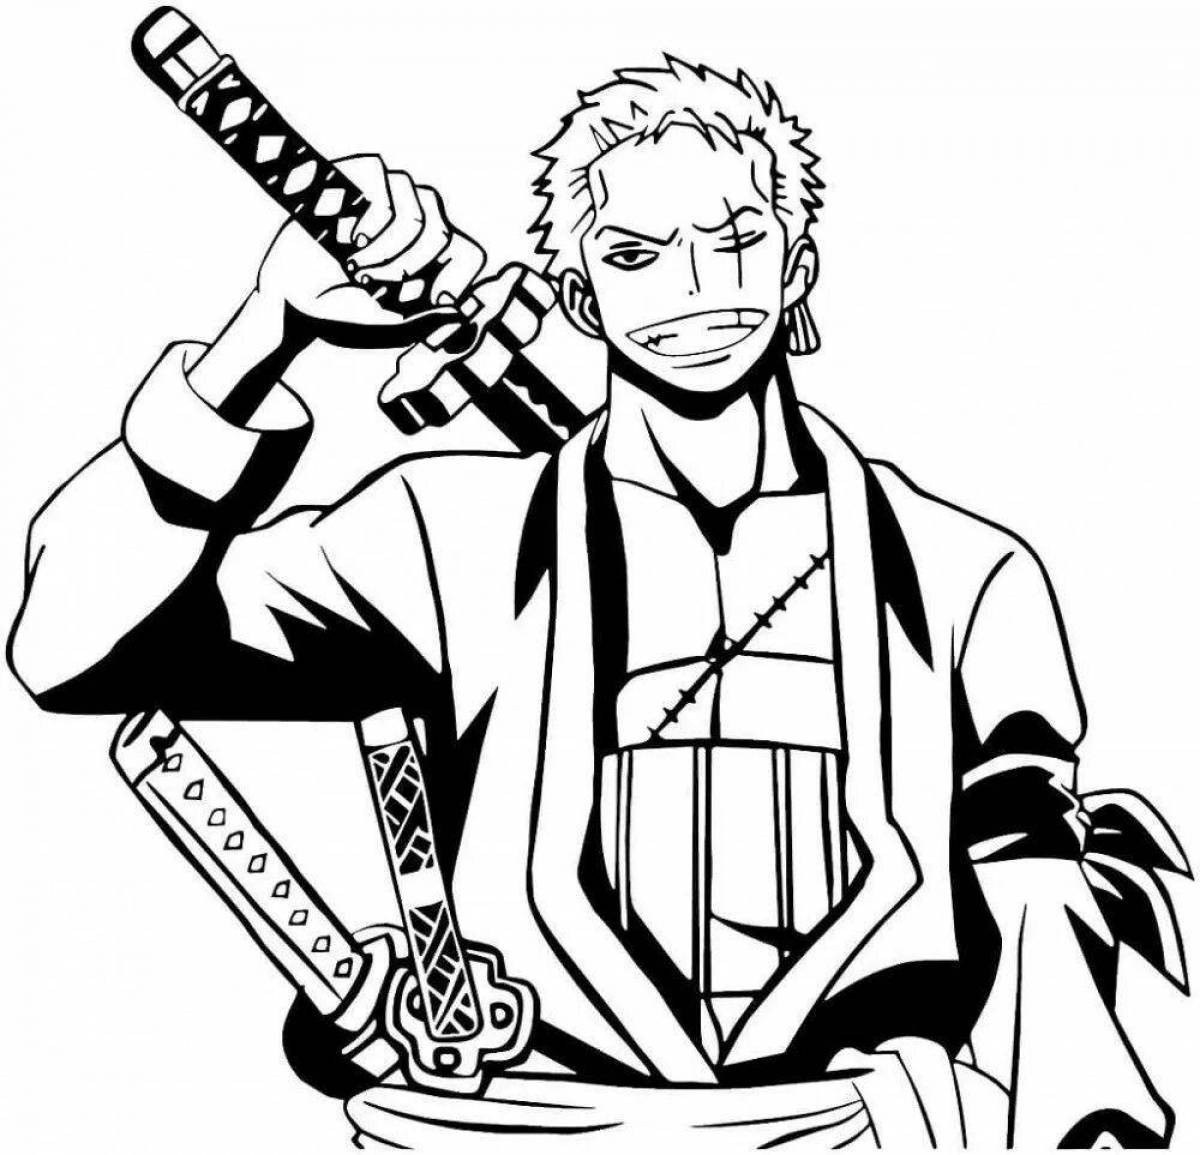 Glorious zoro one piece coloring book